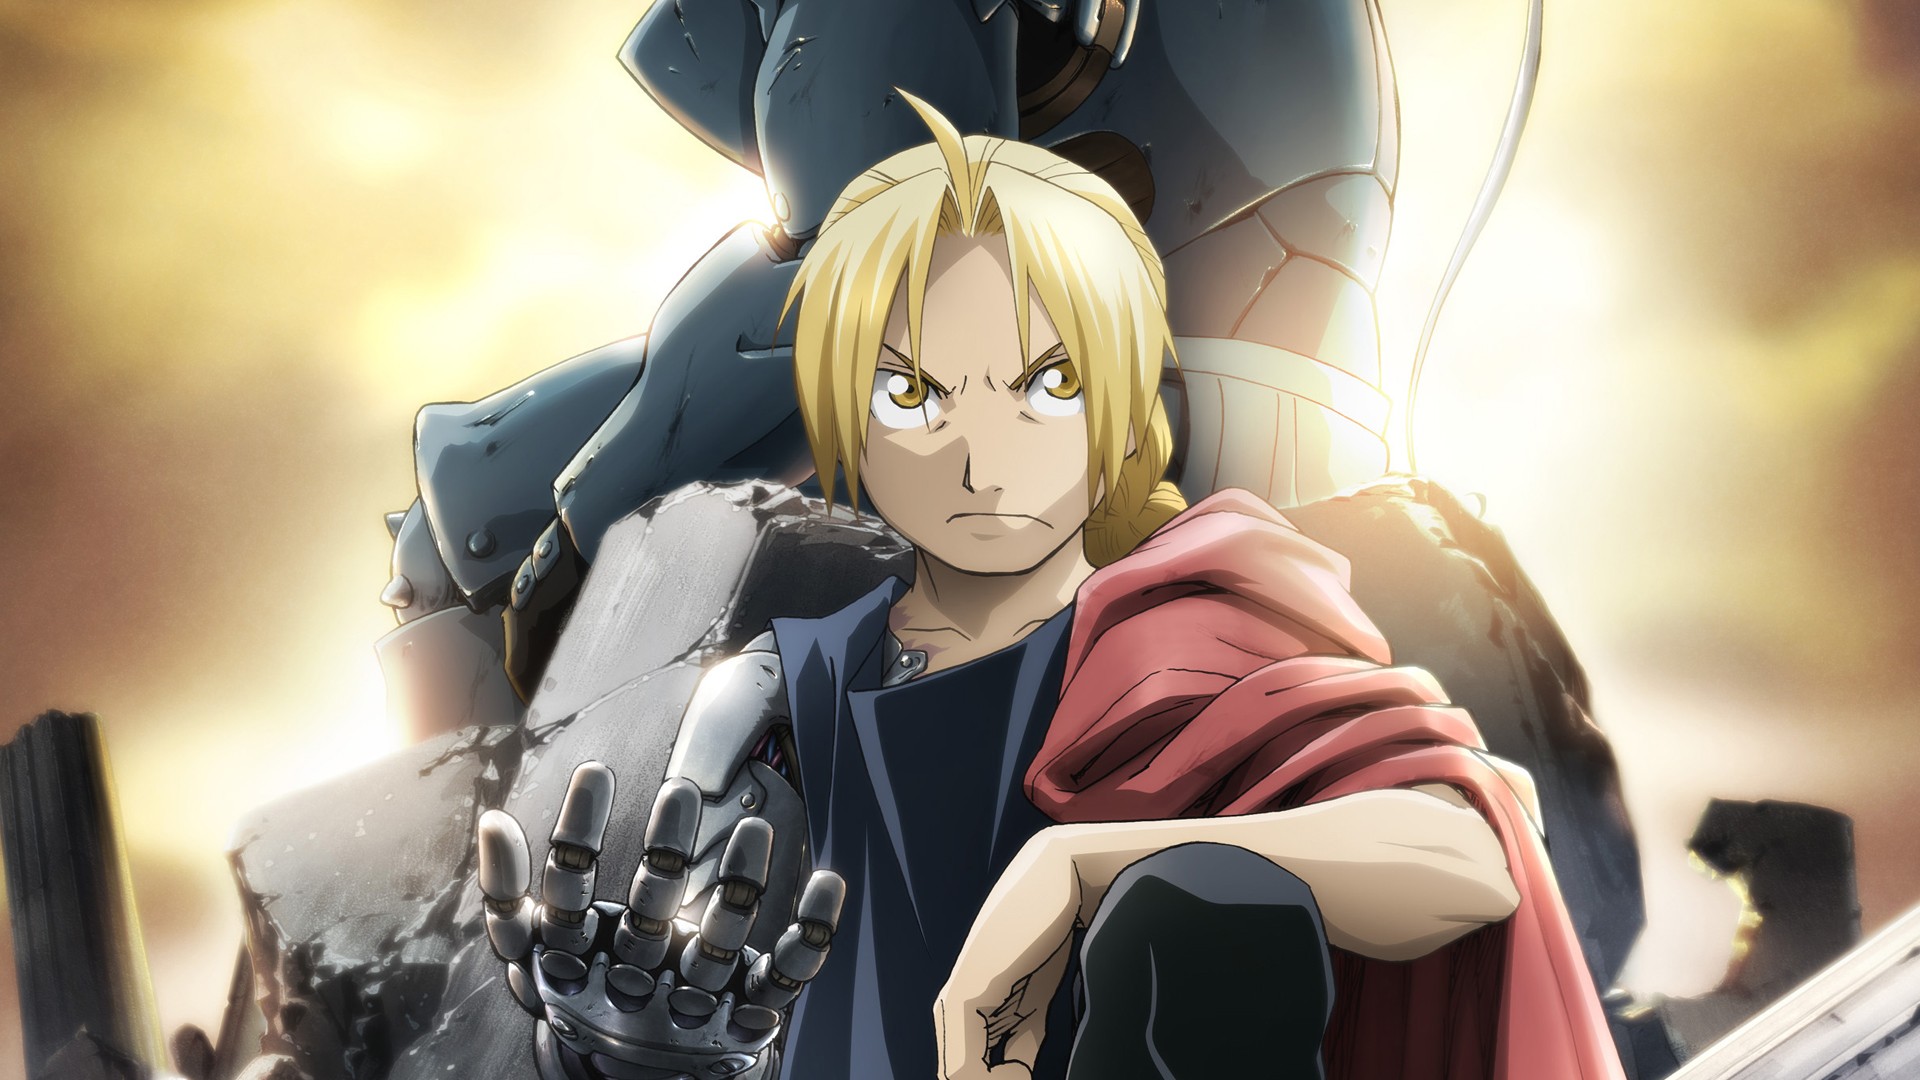 WHY FULL METAL ALCHEMIST:BROTHERHOOD IS THE BEST ANIME!!!(HONEST REVIEW), by EVERYDAYTASTIC